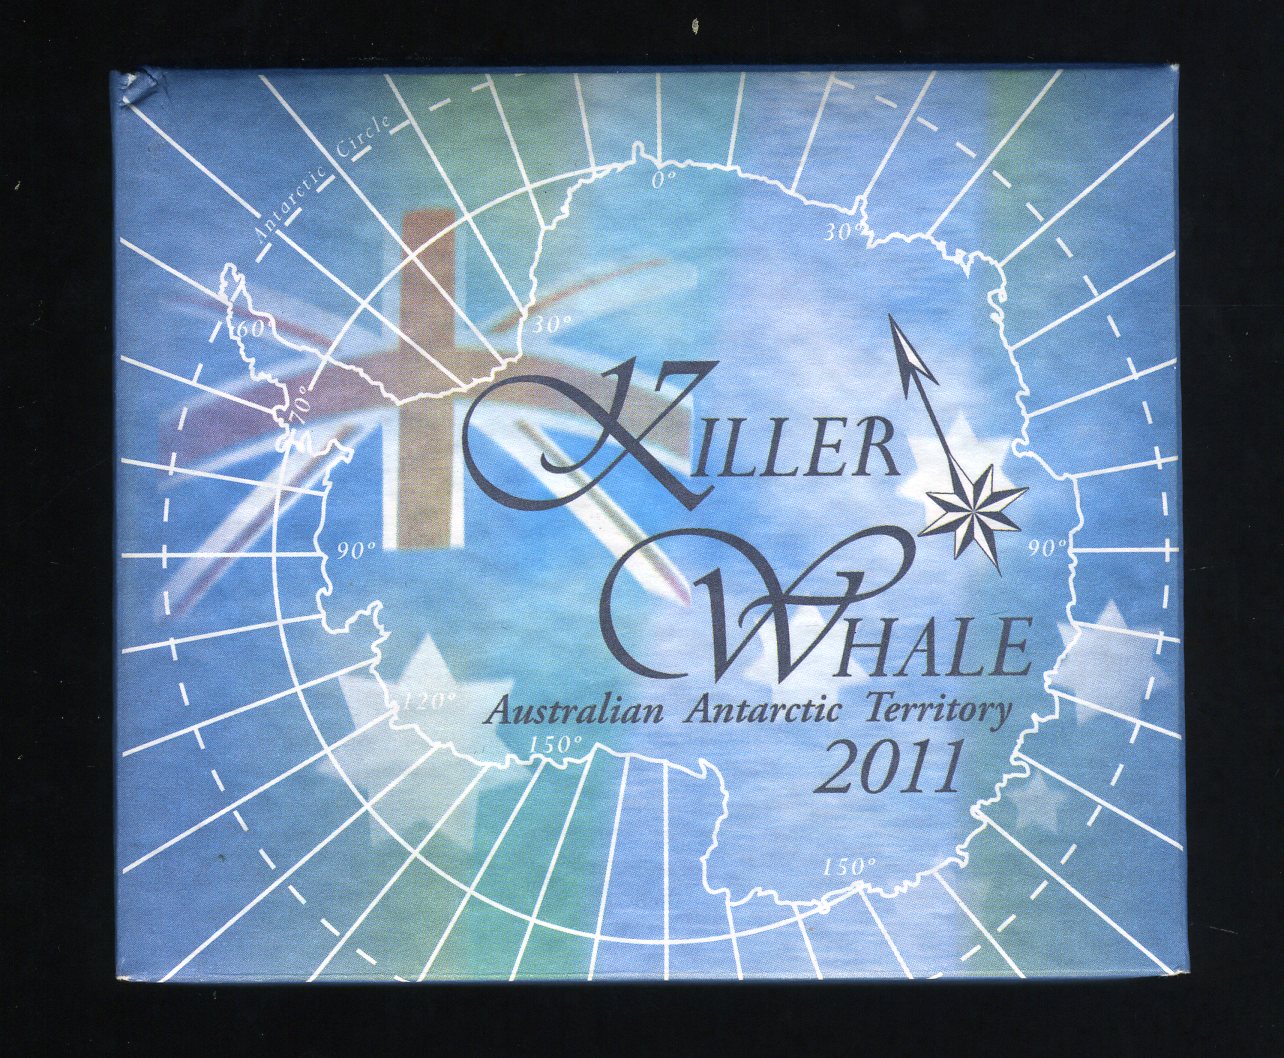 Thumbnail for 2011 Australian Antarctic Territory 1oz Silver Proof Coin - Killer Whale